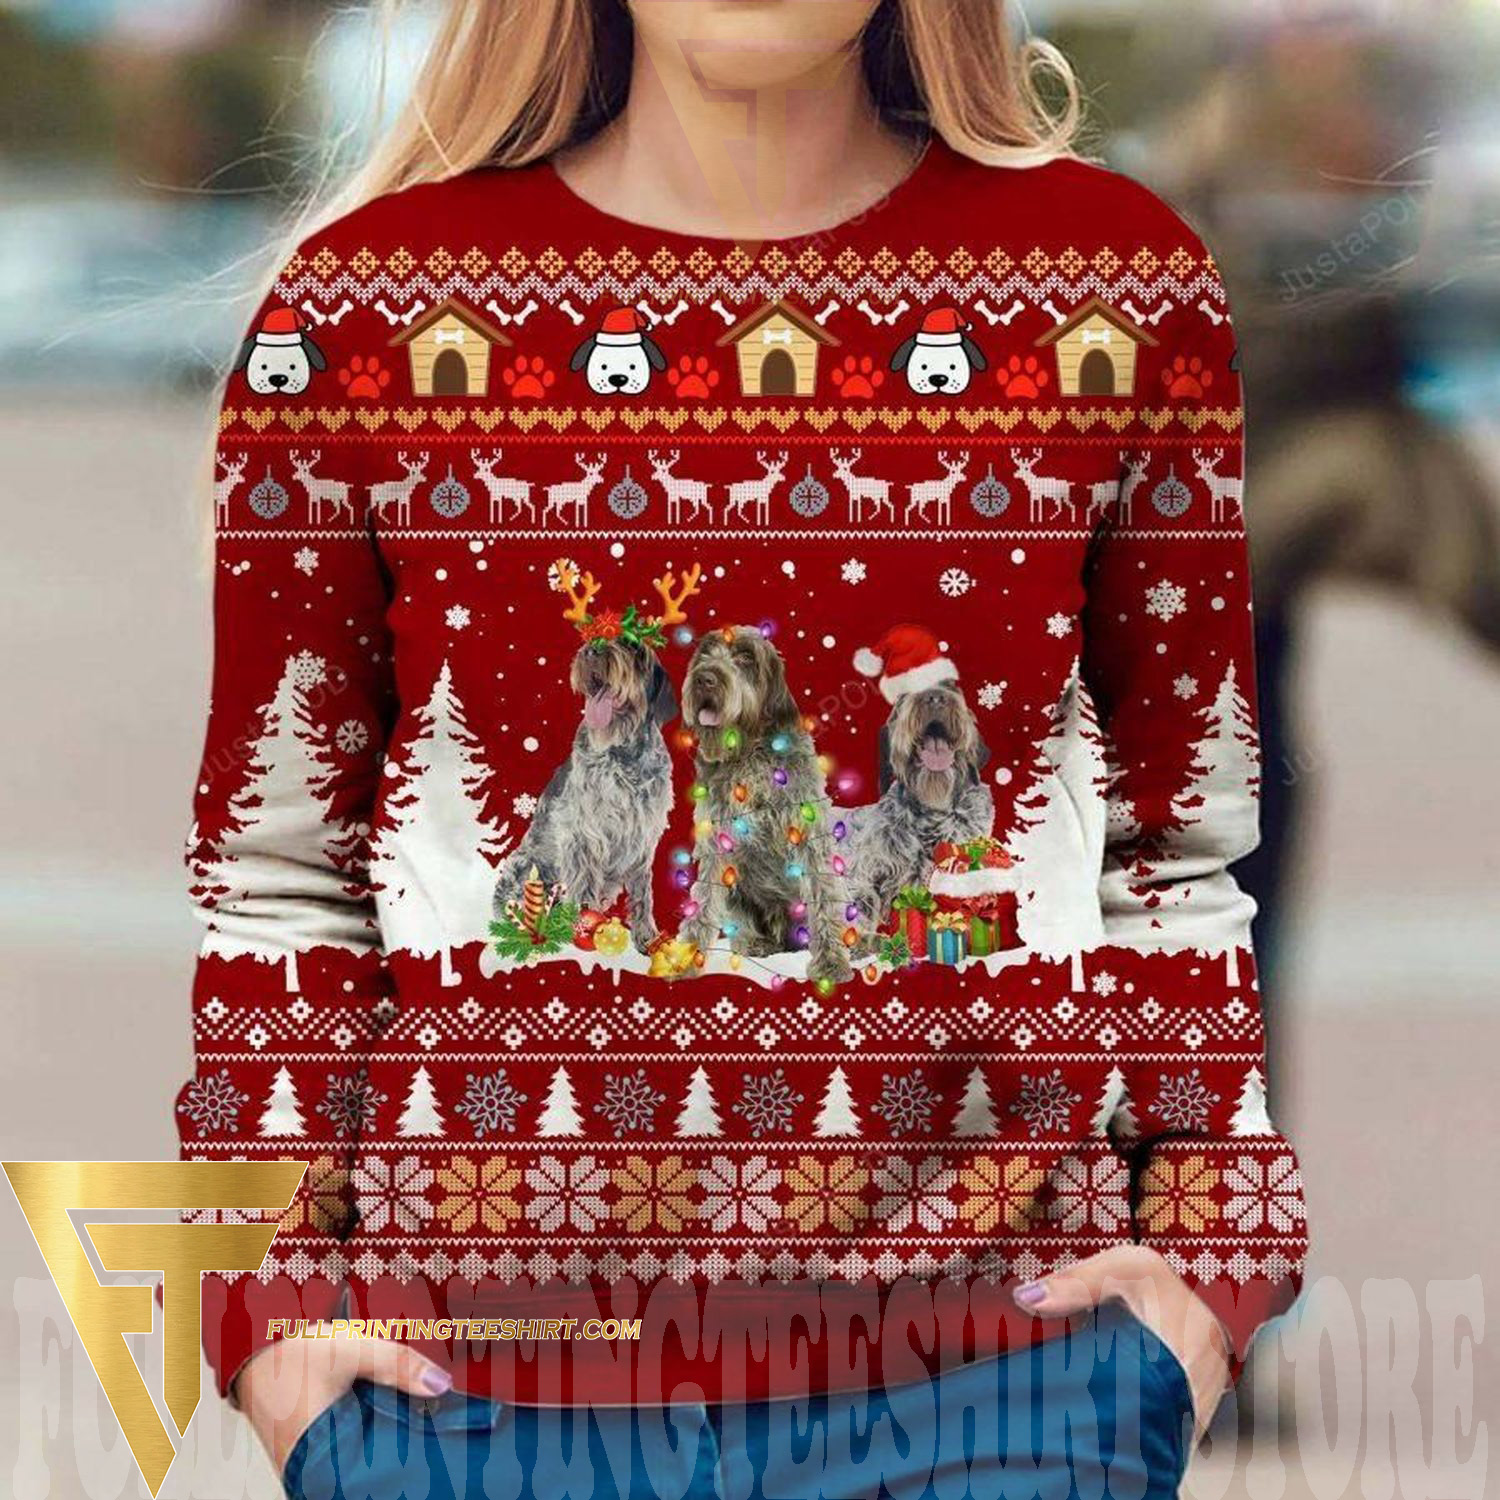 Ugly Christmas Sweaters for sale in Washington D.C., Facebook Marketplace